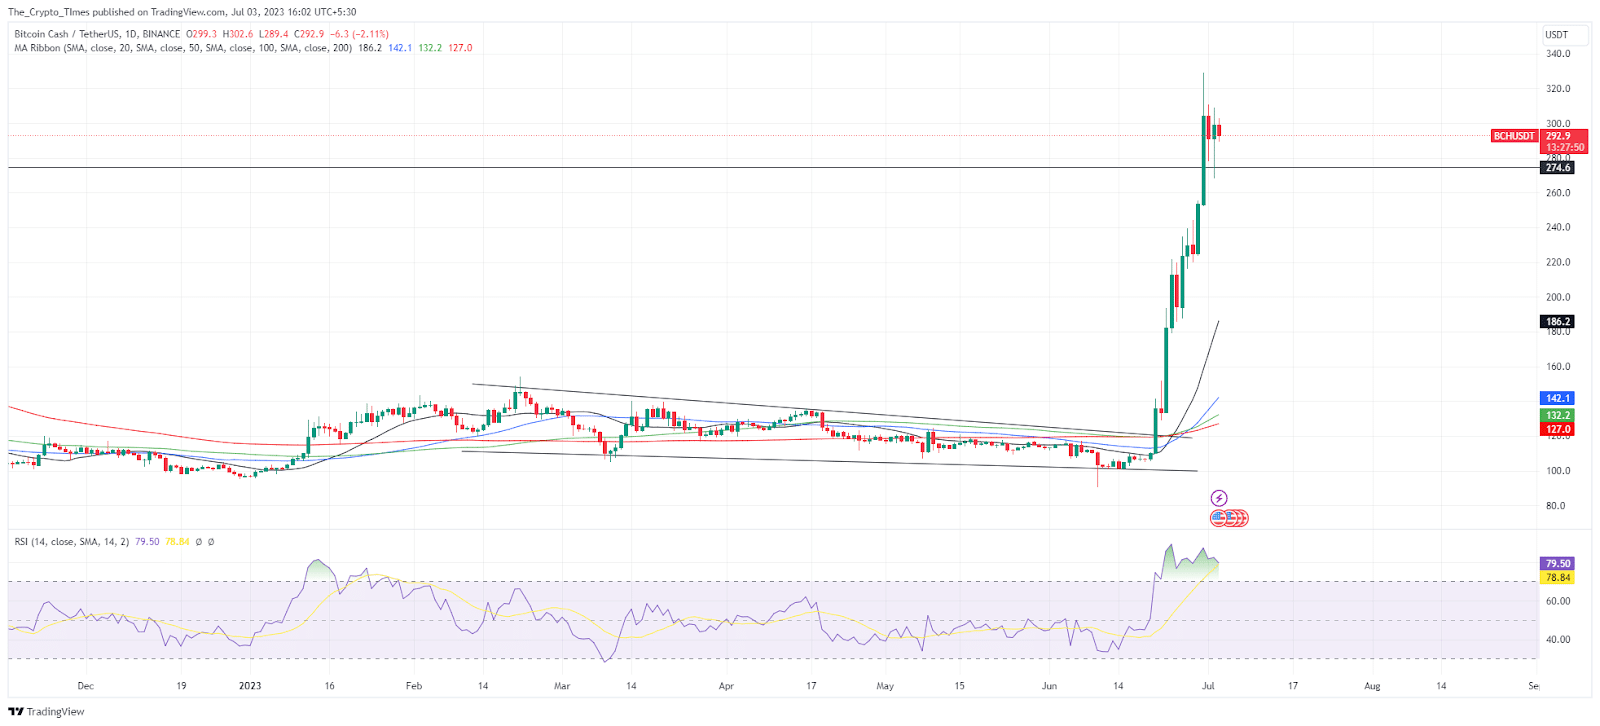 Bitcoin Cash (BCH) Gains 200% in the Last Two Weeks